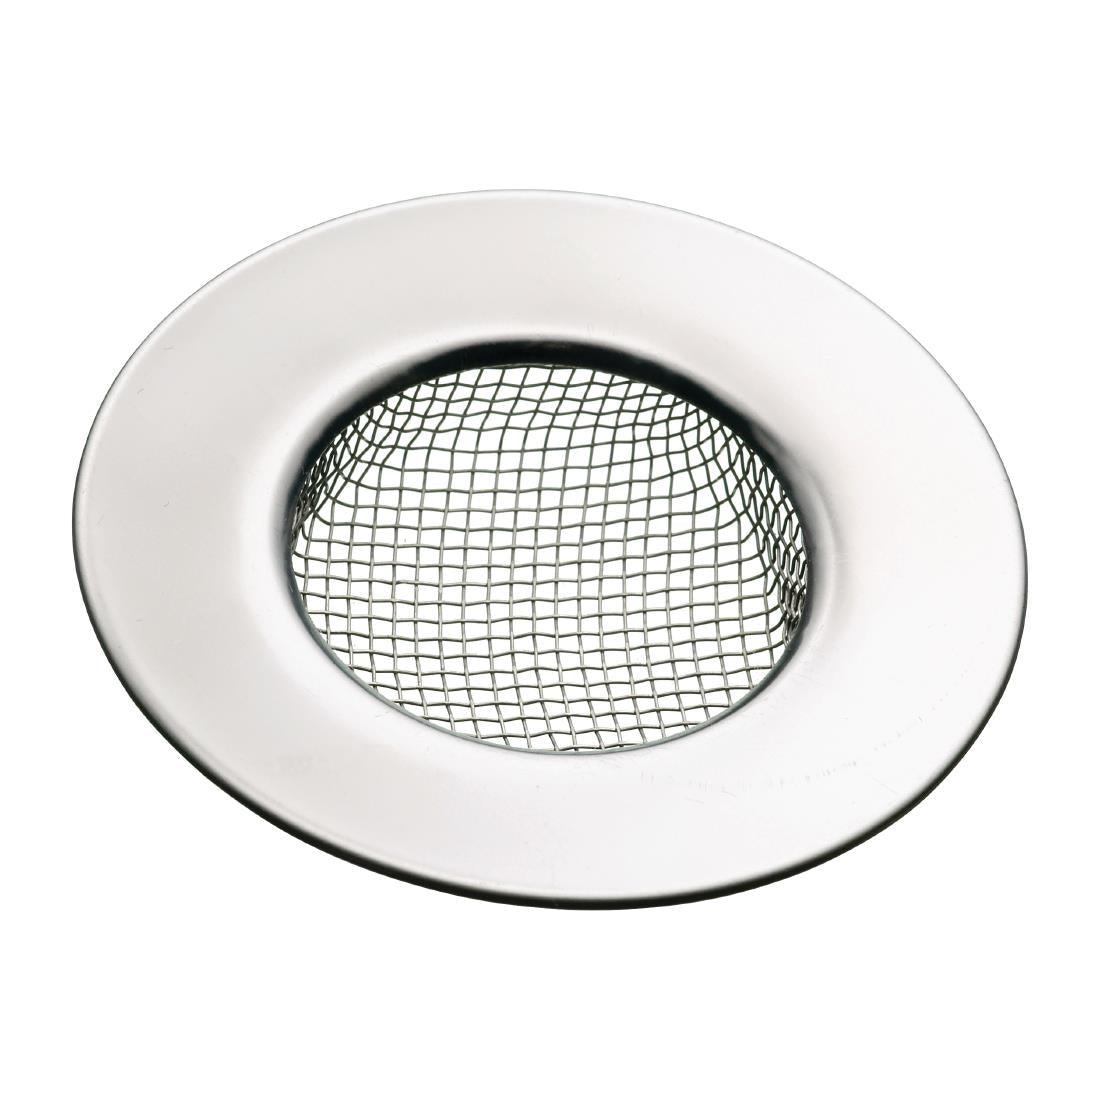 CY030 KitchenCraft Stainless Steel Sink Strainer 75mm JD Catering Equipment Solutions Ltd